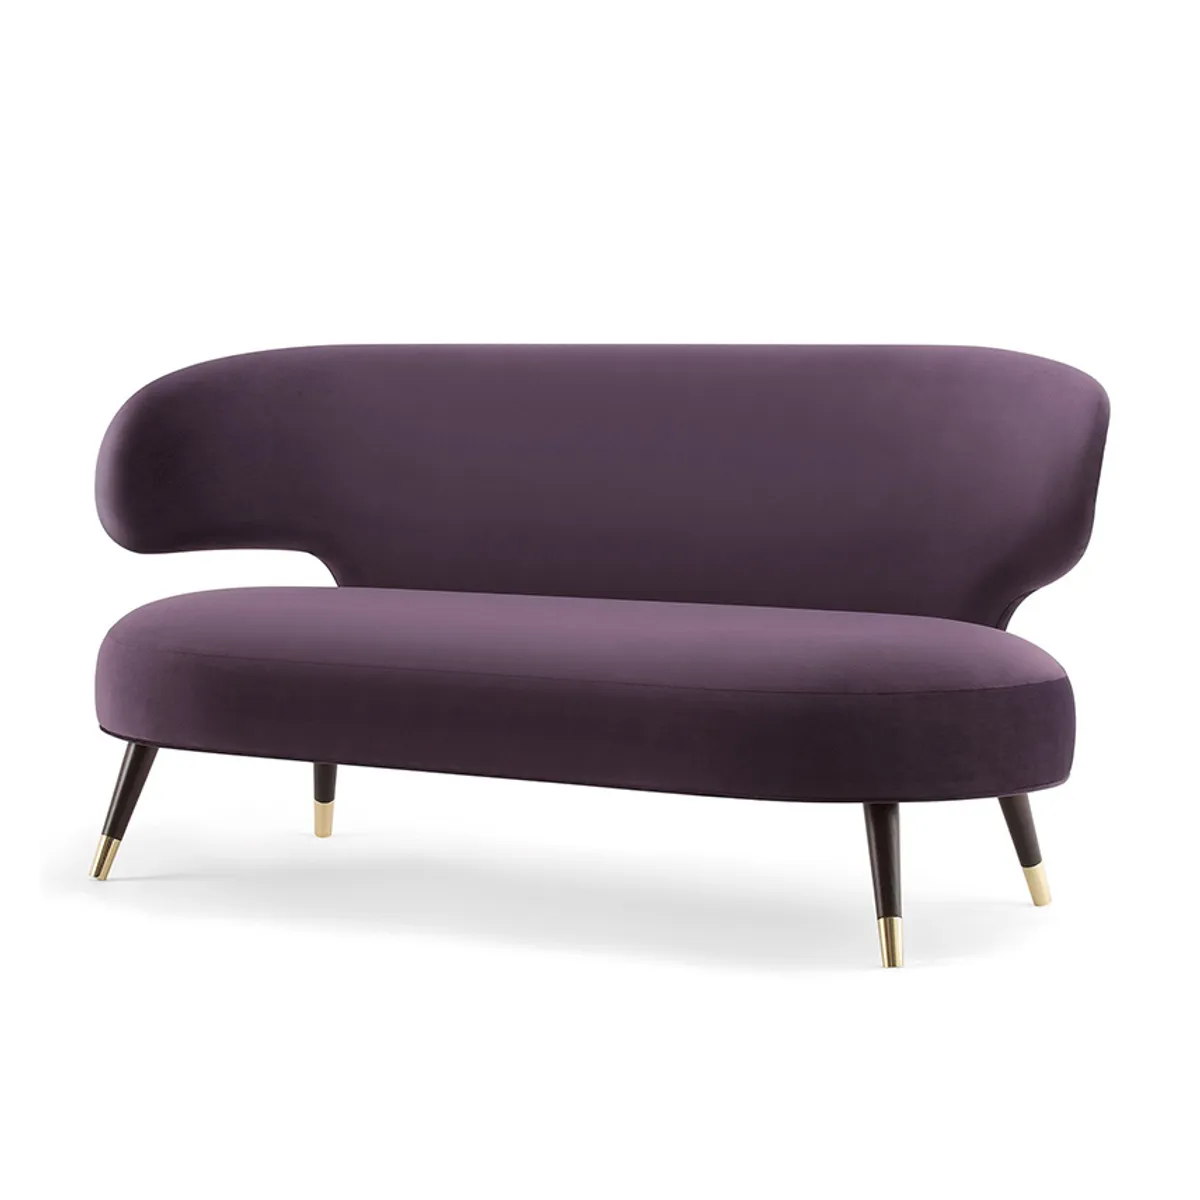 Sylvia Sofa Purple Upholstery And Wooden Legs Hotel Furniture By Insideoutcontracts